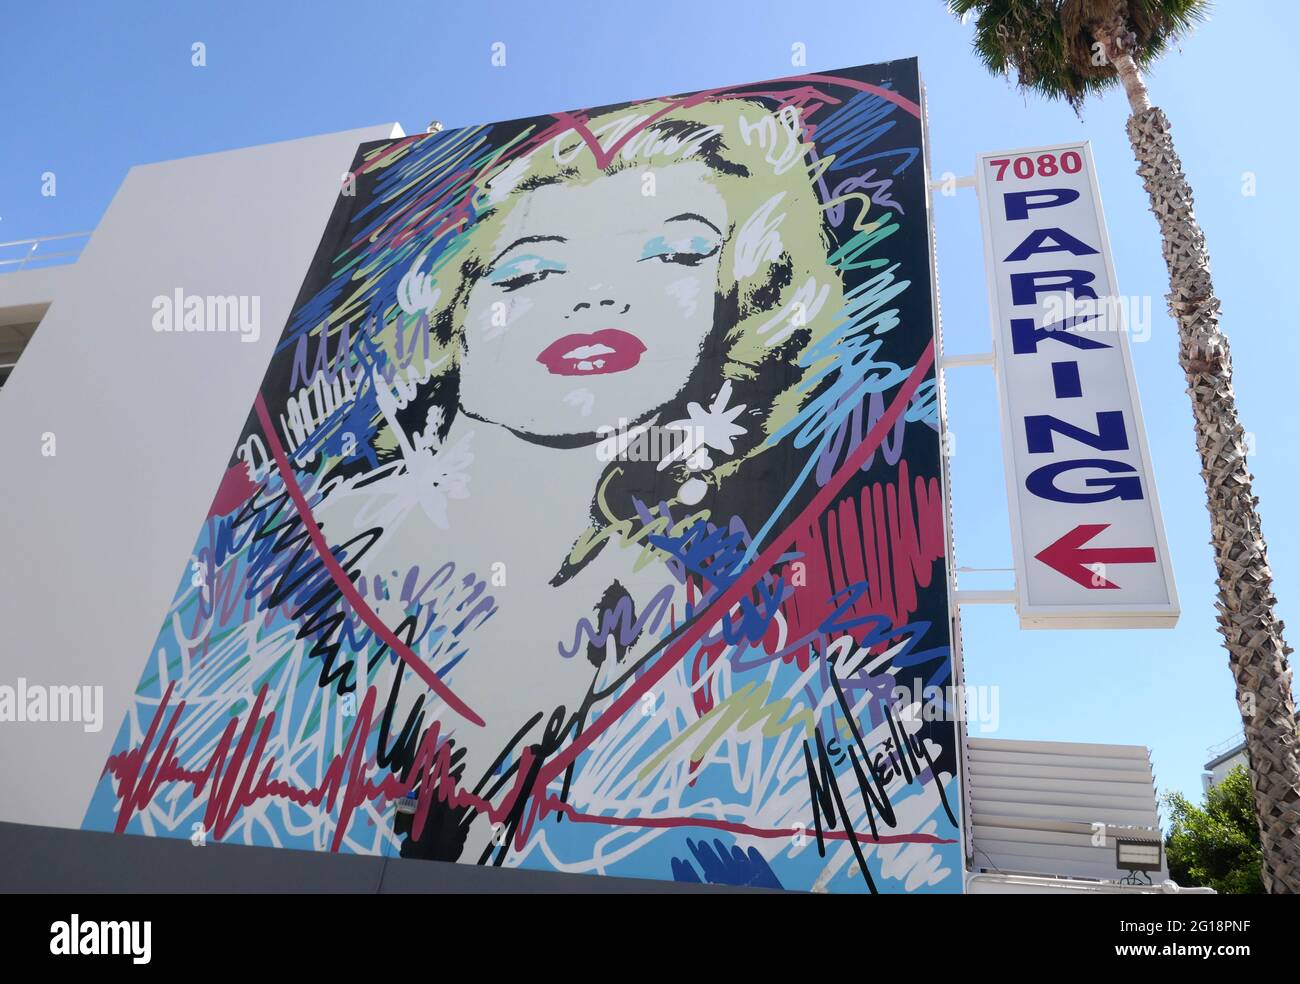 Los Angeles, California, USA  4th June 2021 A general view of atmosphere of Marilyn Monroe Art Mural on June 4, 2021 in Los Angeles, California, USA. Photo by Barry King/Alamy Stock Photo Stock Photo